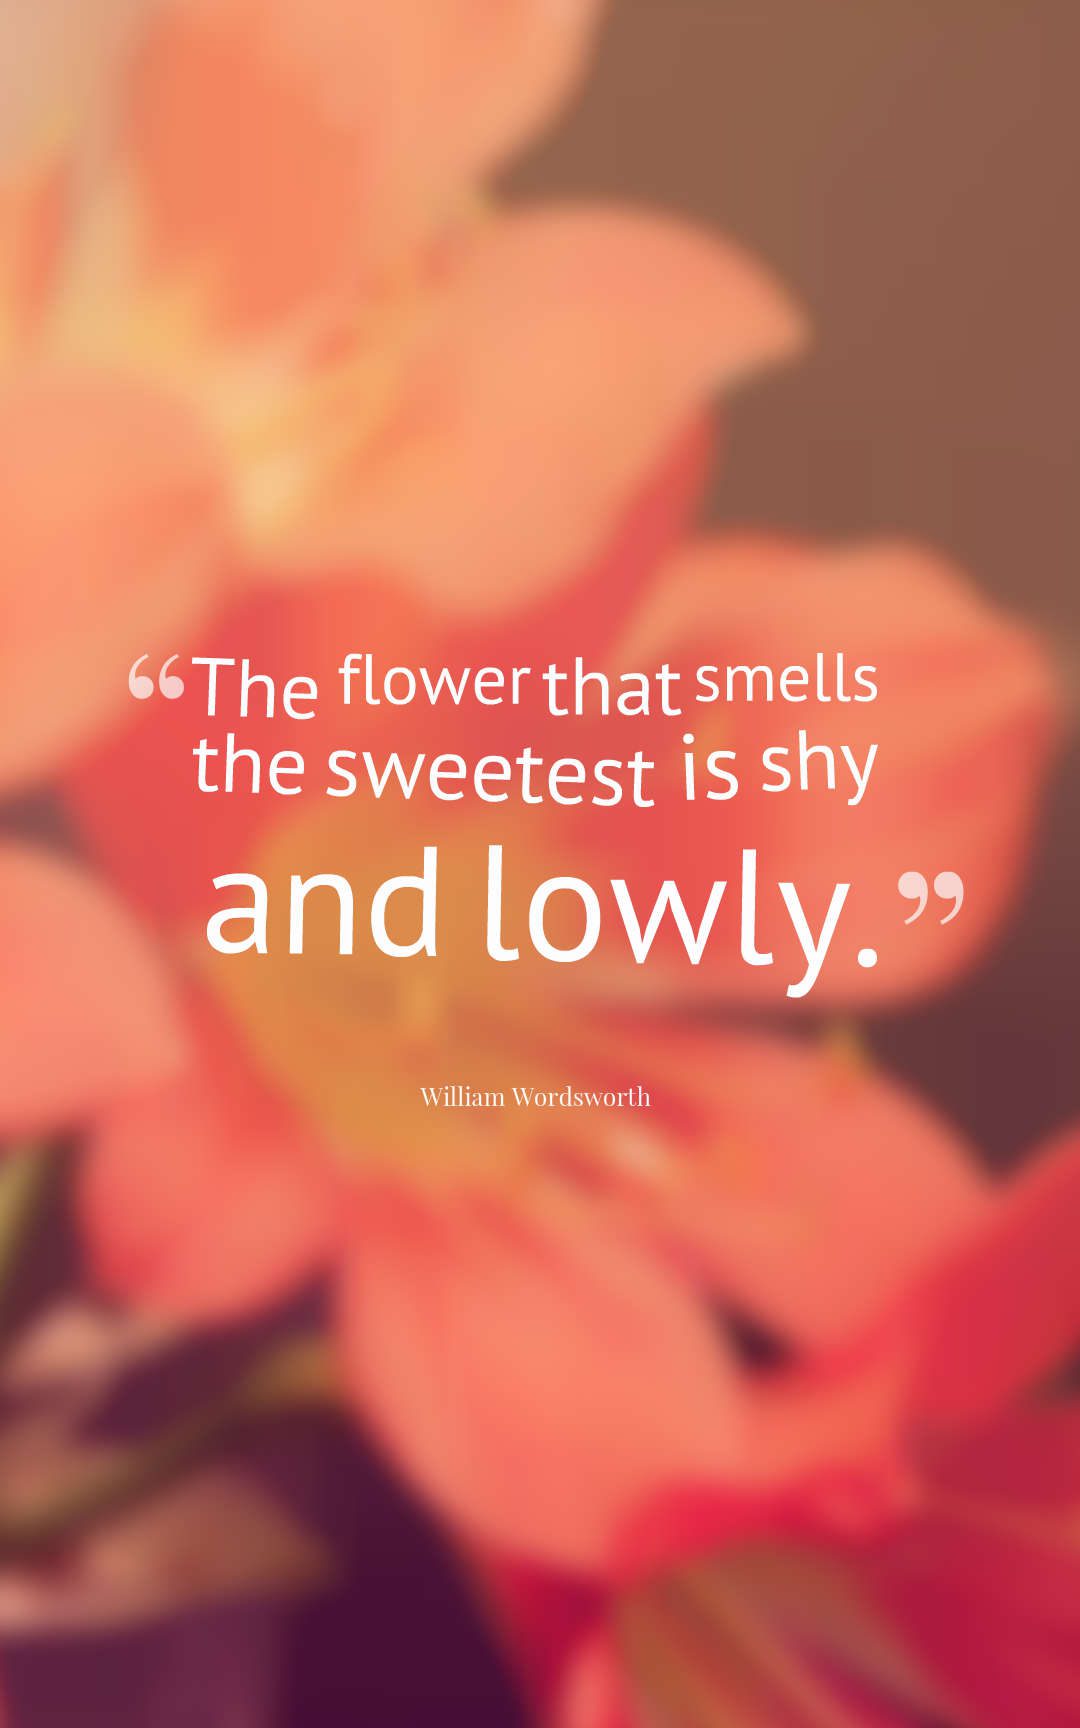 The flower that smells the sweetest is shy and lowly.